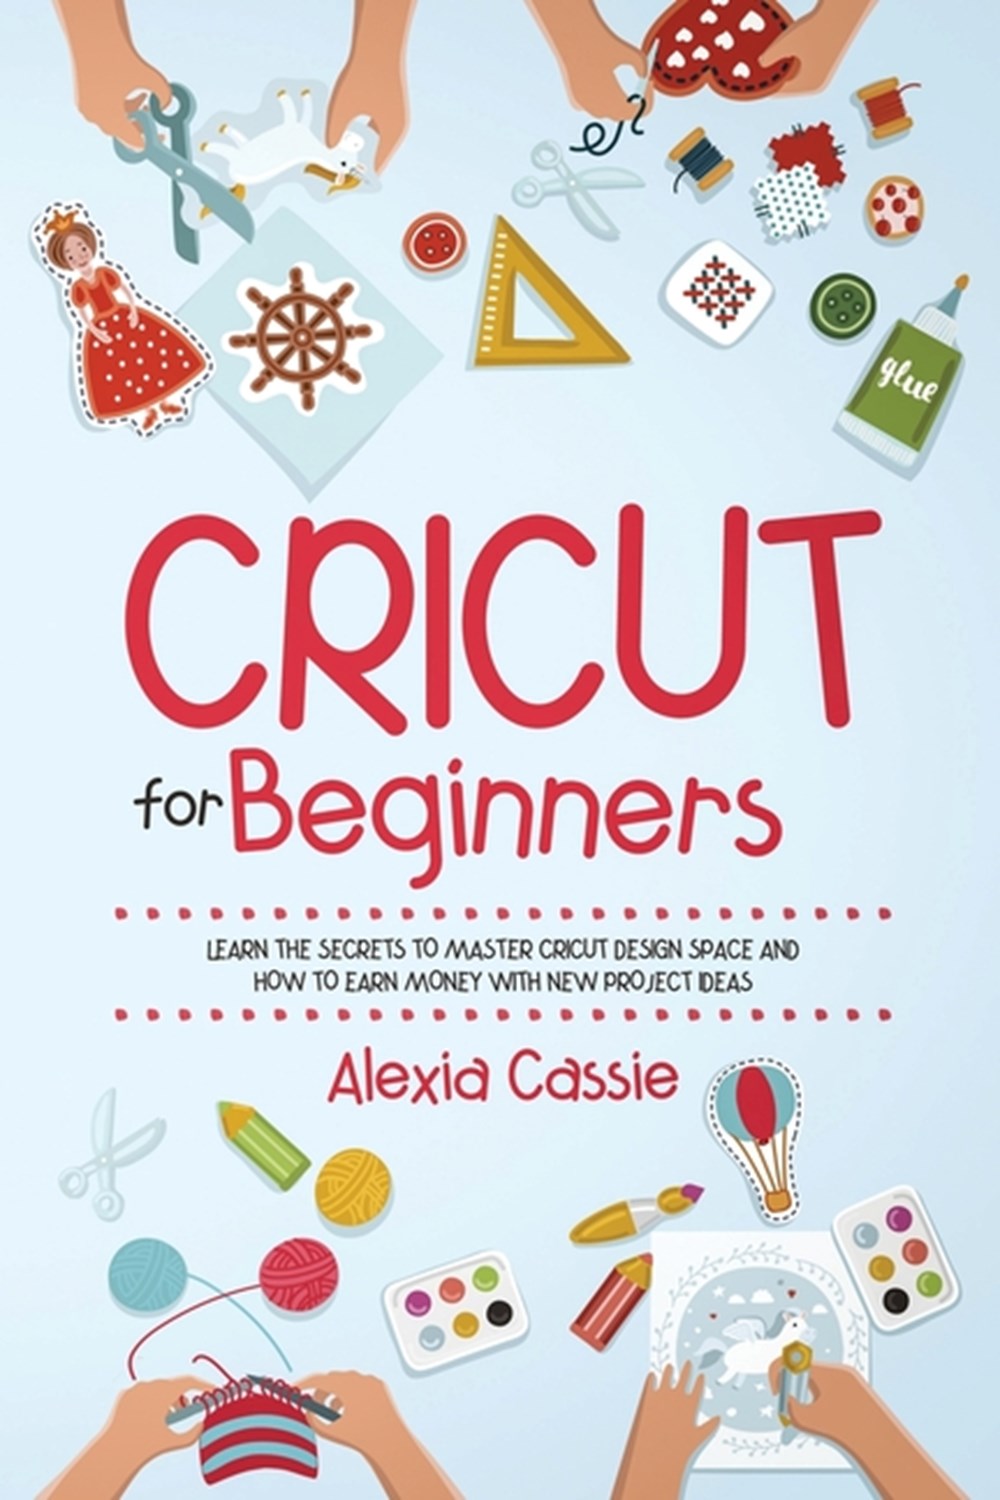 Cricut for Beginners: Learn the Secrets to Master Cricut Design Space and Finally Earning Money with